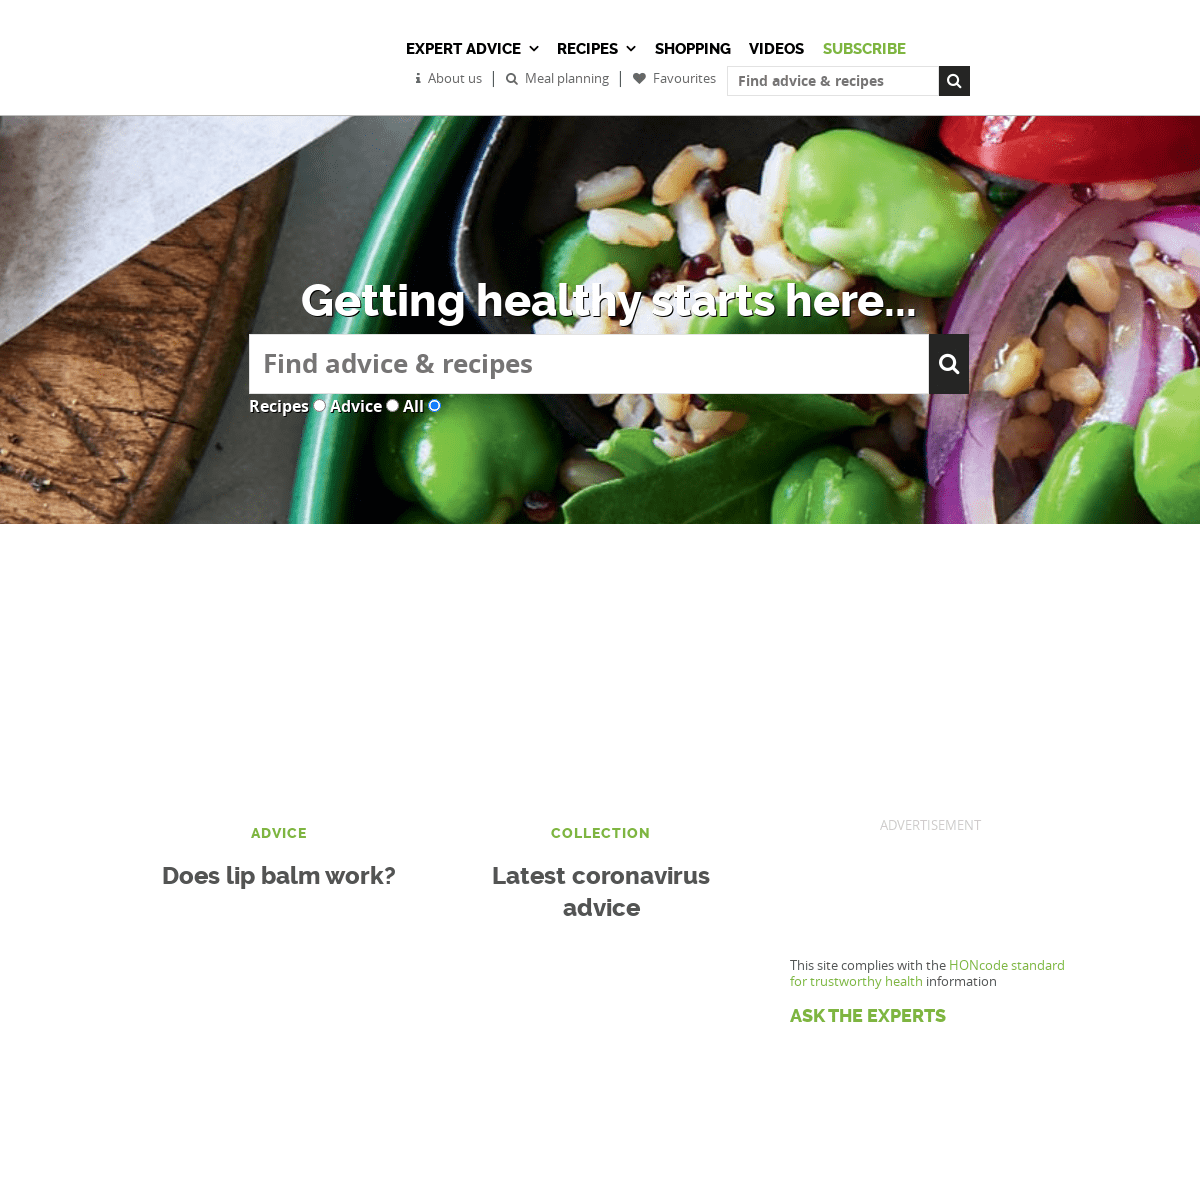 A complete backup of https://healthyfood.com